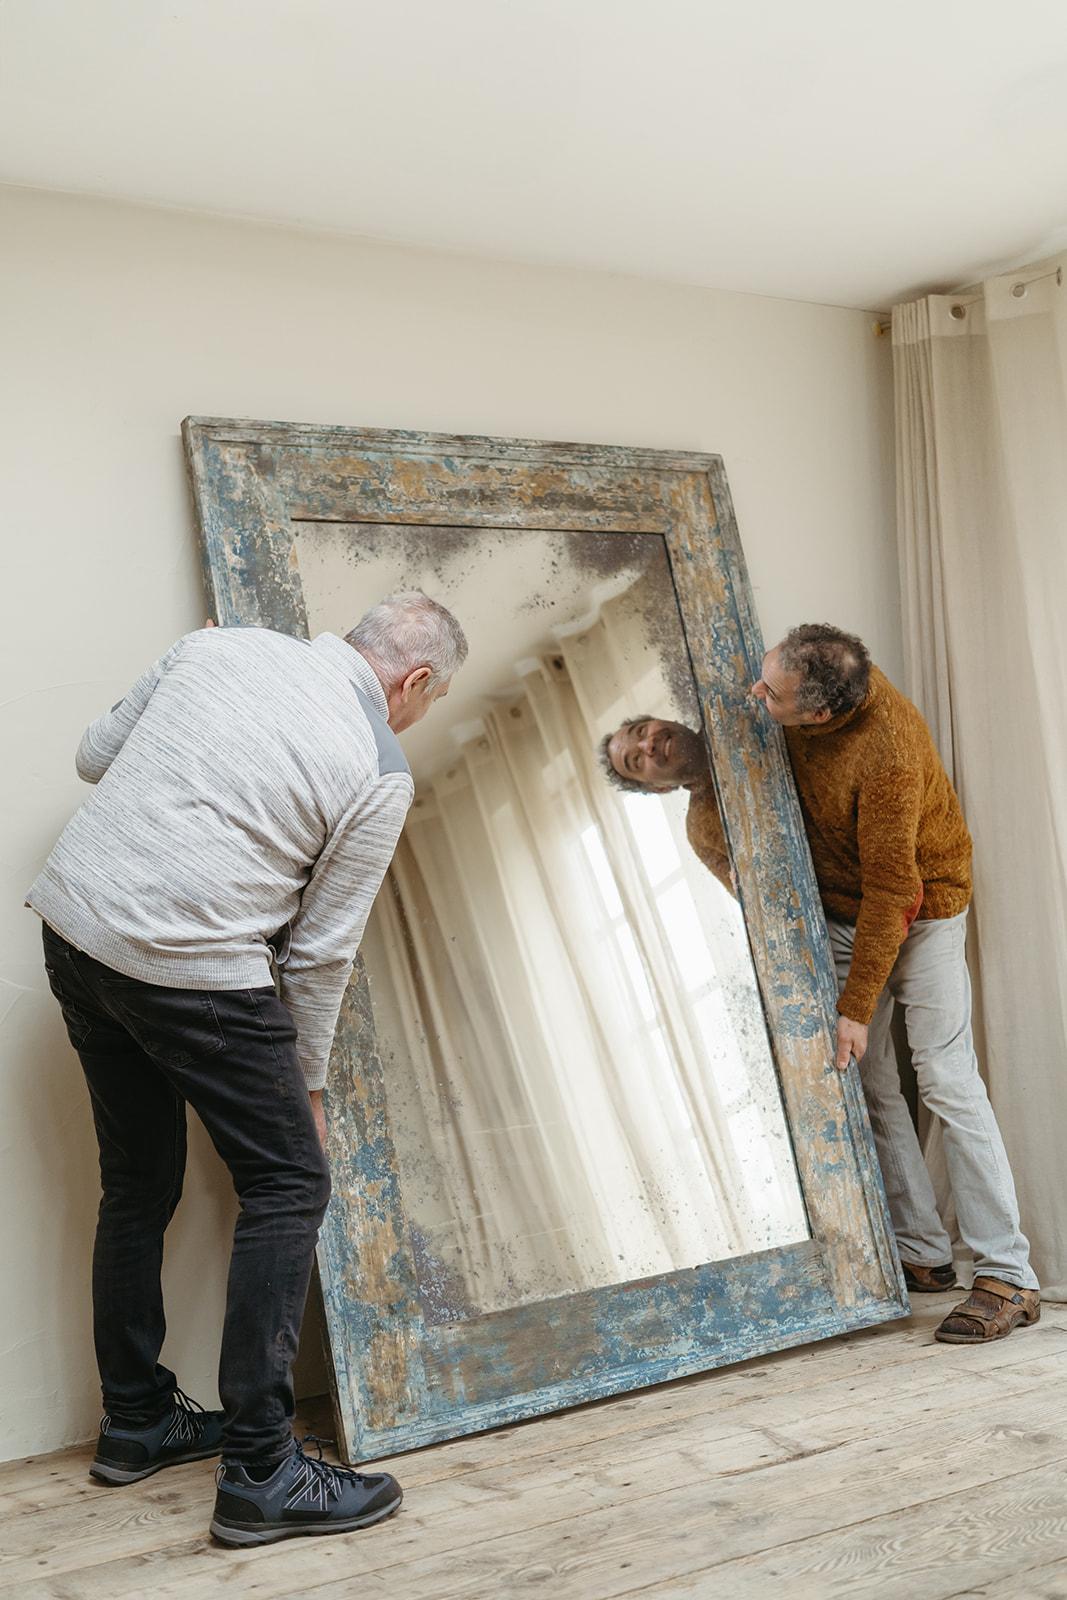 an xl full lenght mirror, pineframed, with rests of old paint ... 
can be used vertical or horizontal ... 